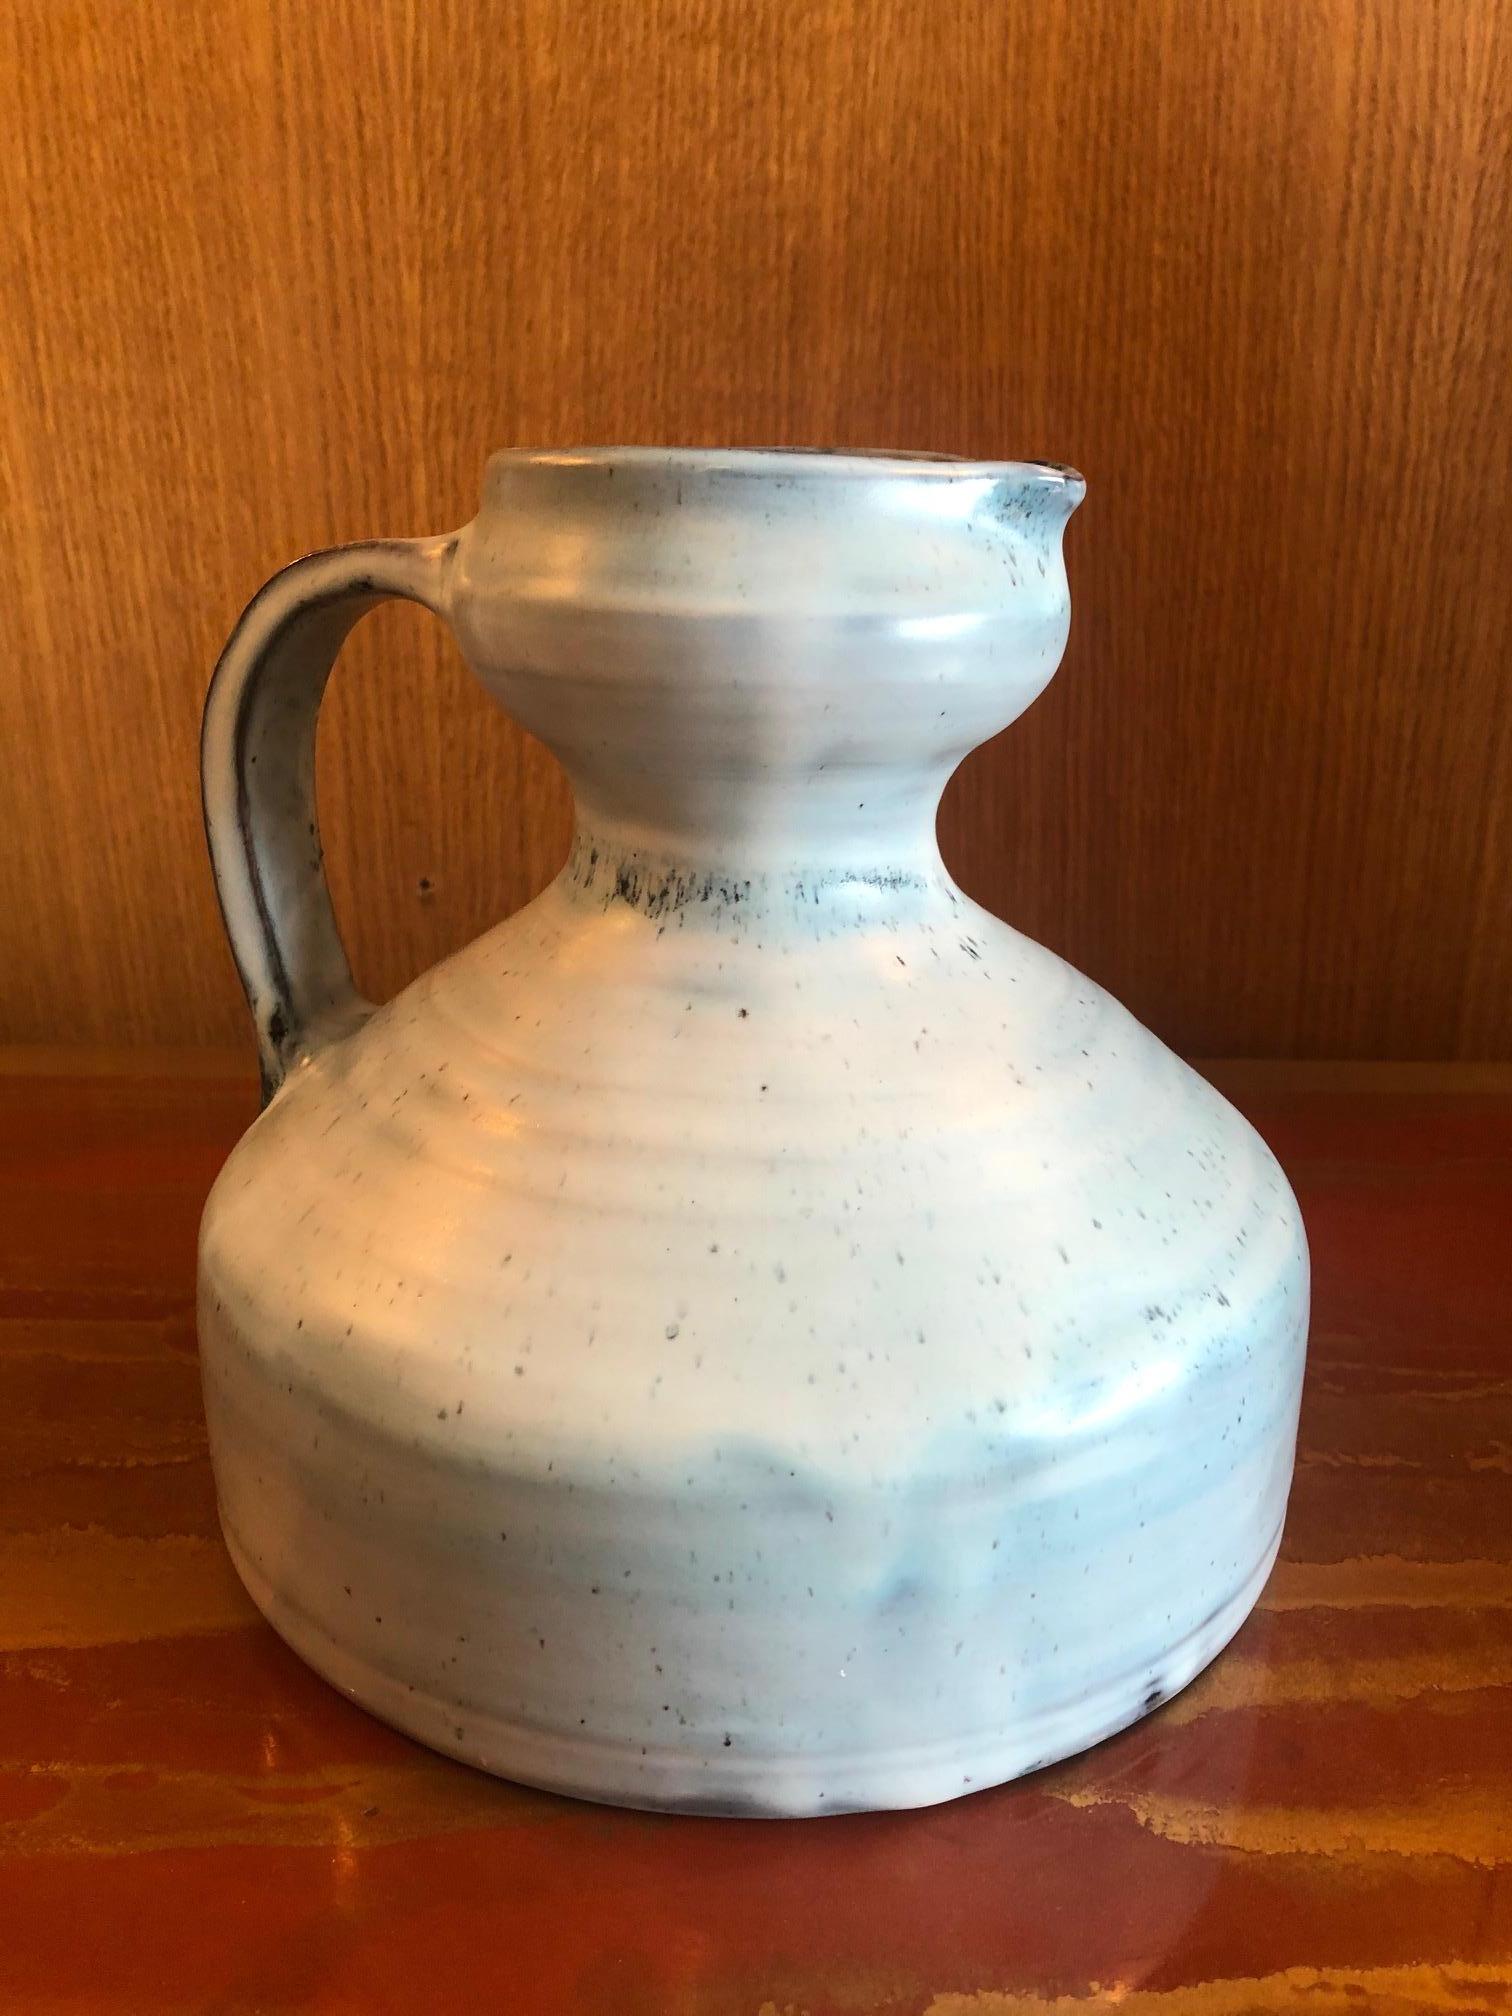 Ceramic pitcher by Jacques Pouchain, France, 1960s
Enamaled ceramic, signed 